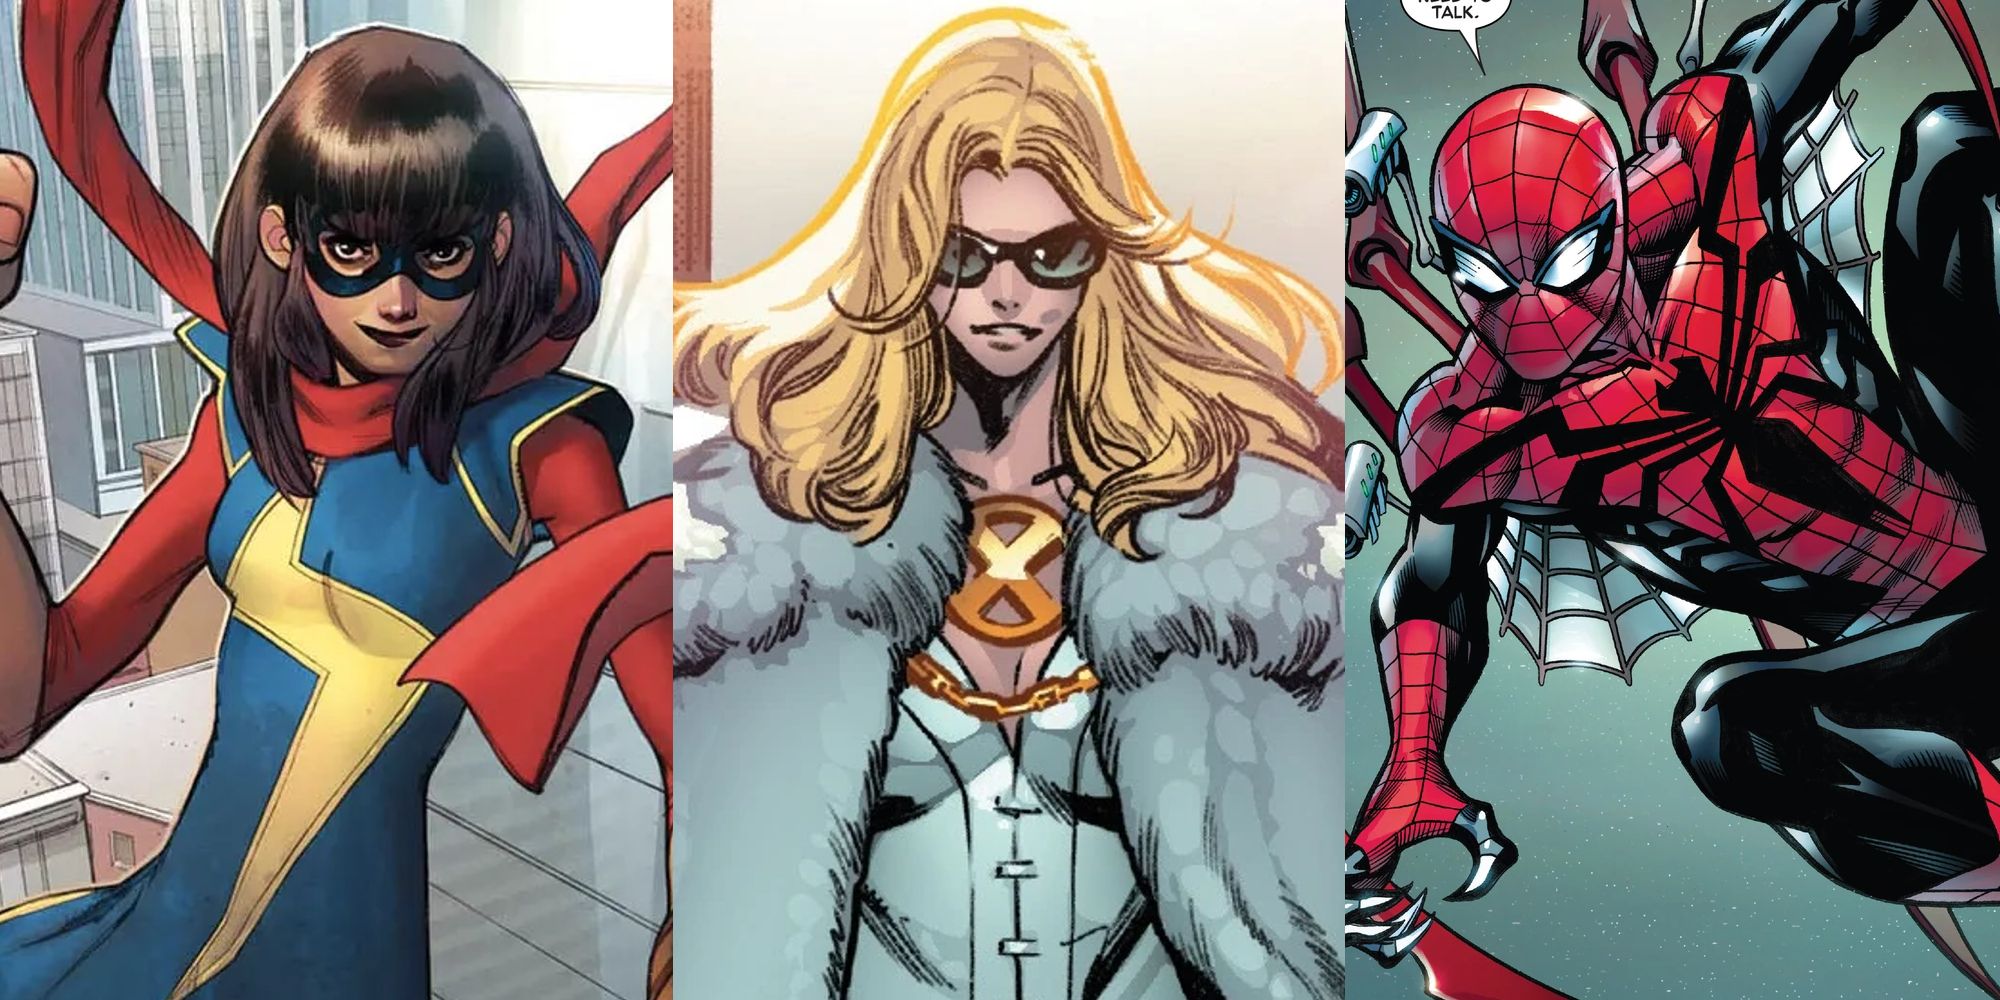 Kamala Khan in a city; Emma Frost in sunglasses; Superior Spider-Man